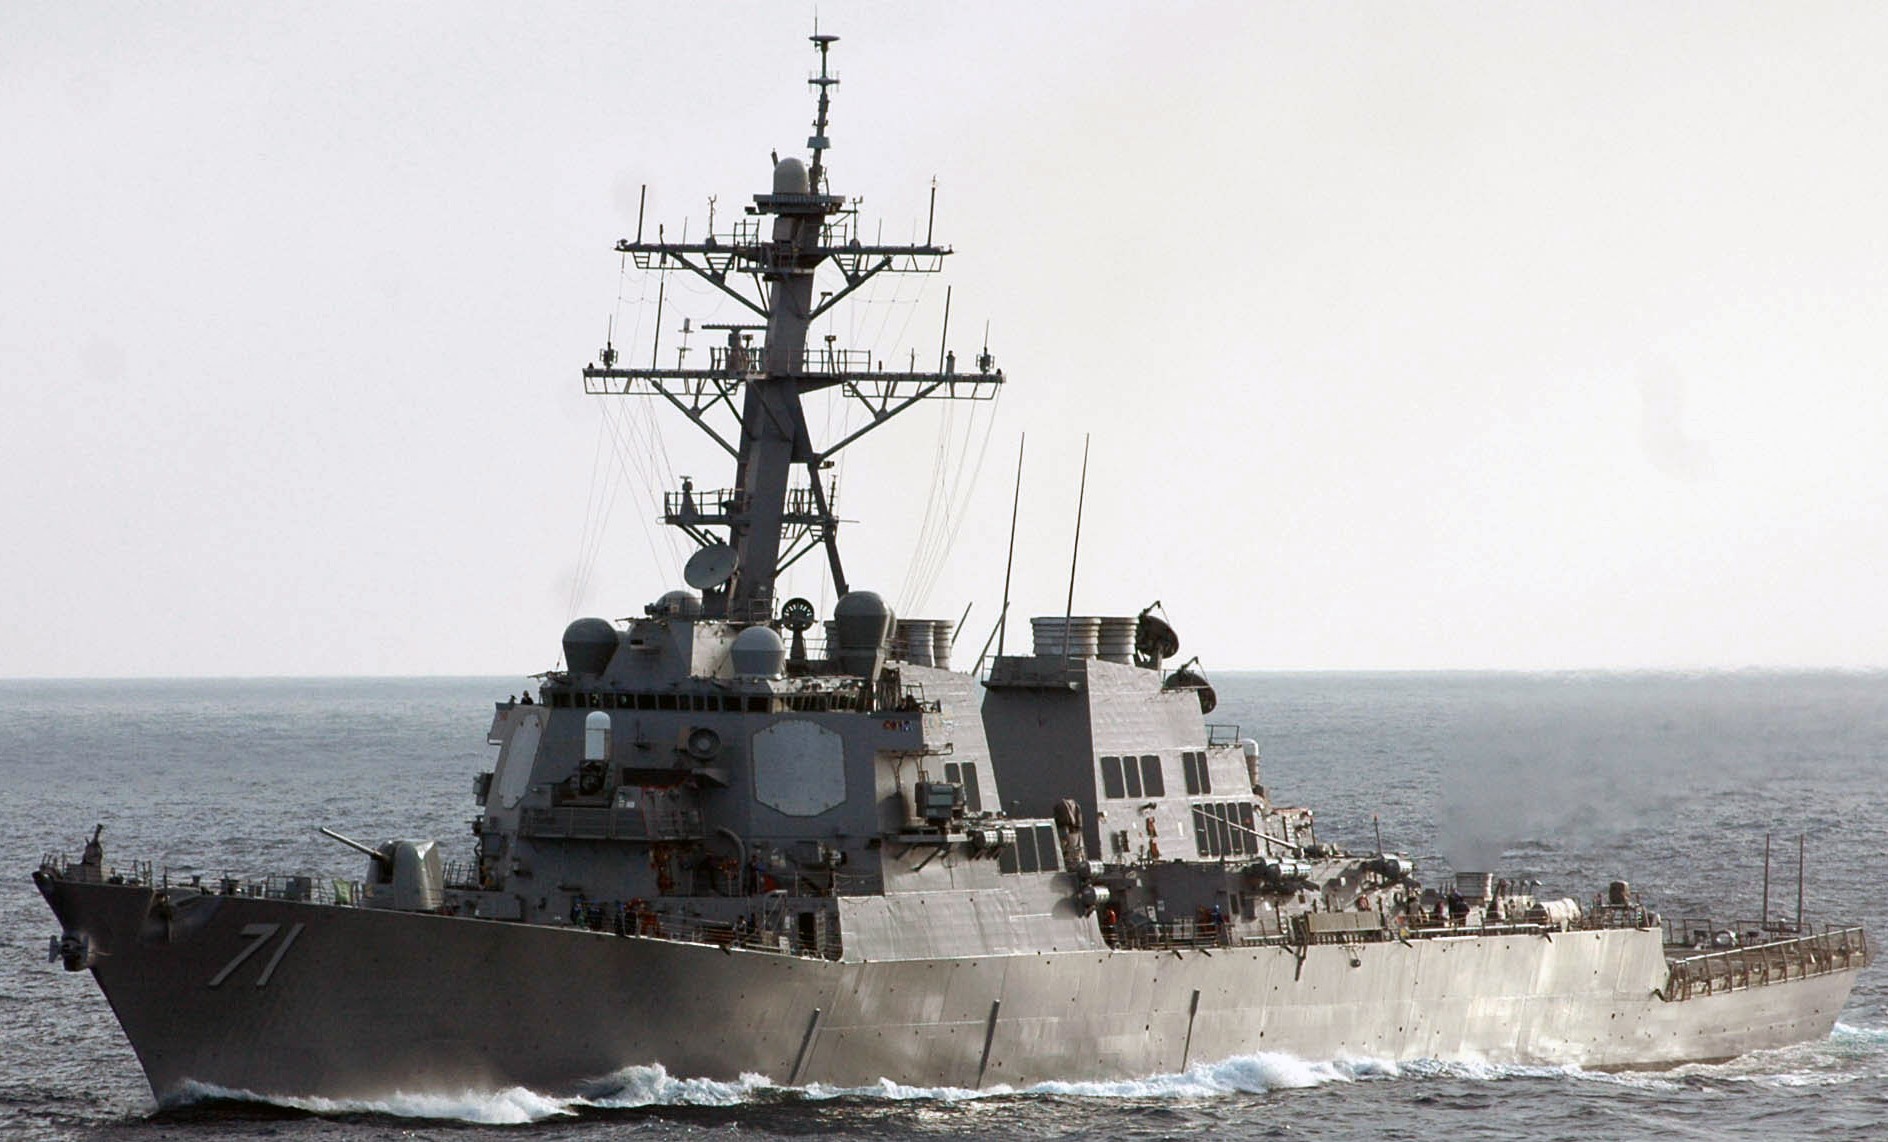 ddg-71 uss ross guided missile destroyer arleigh burke class aegis bmd 85